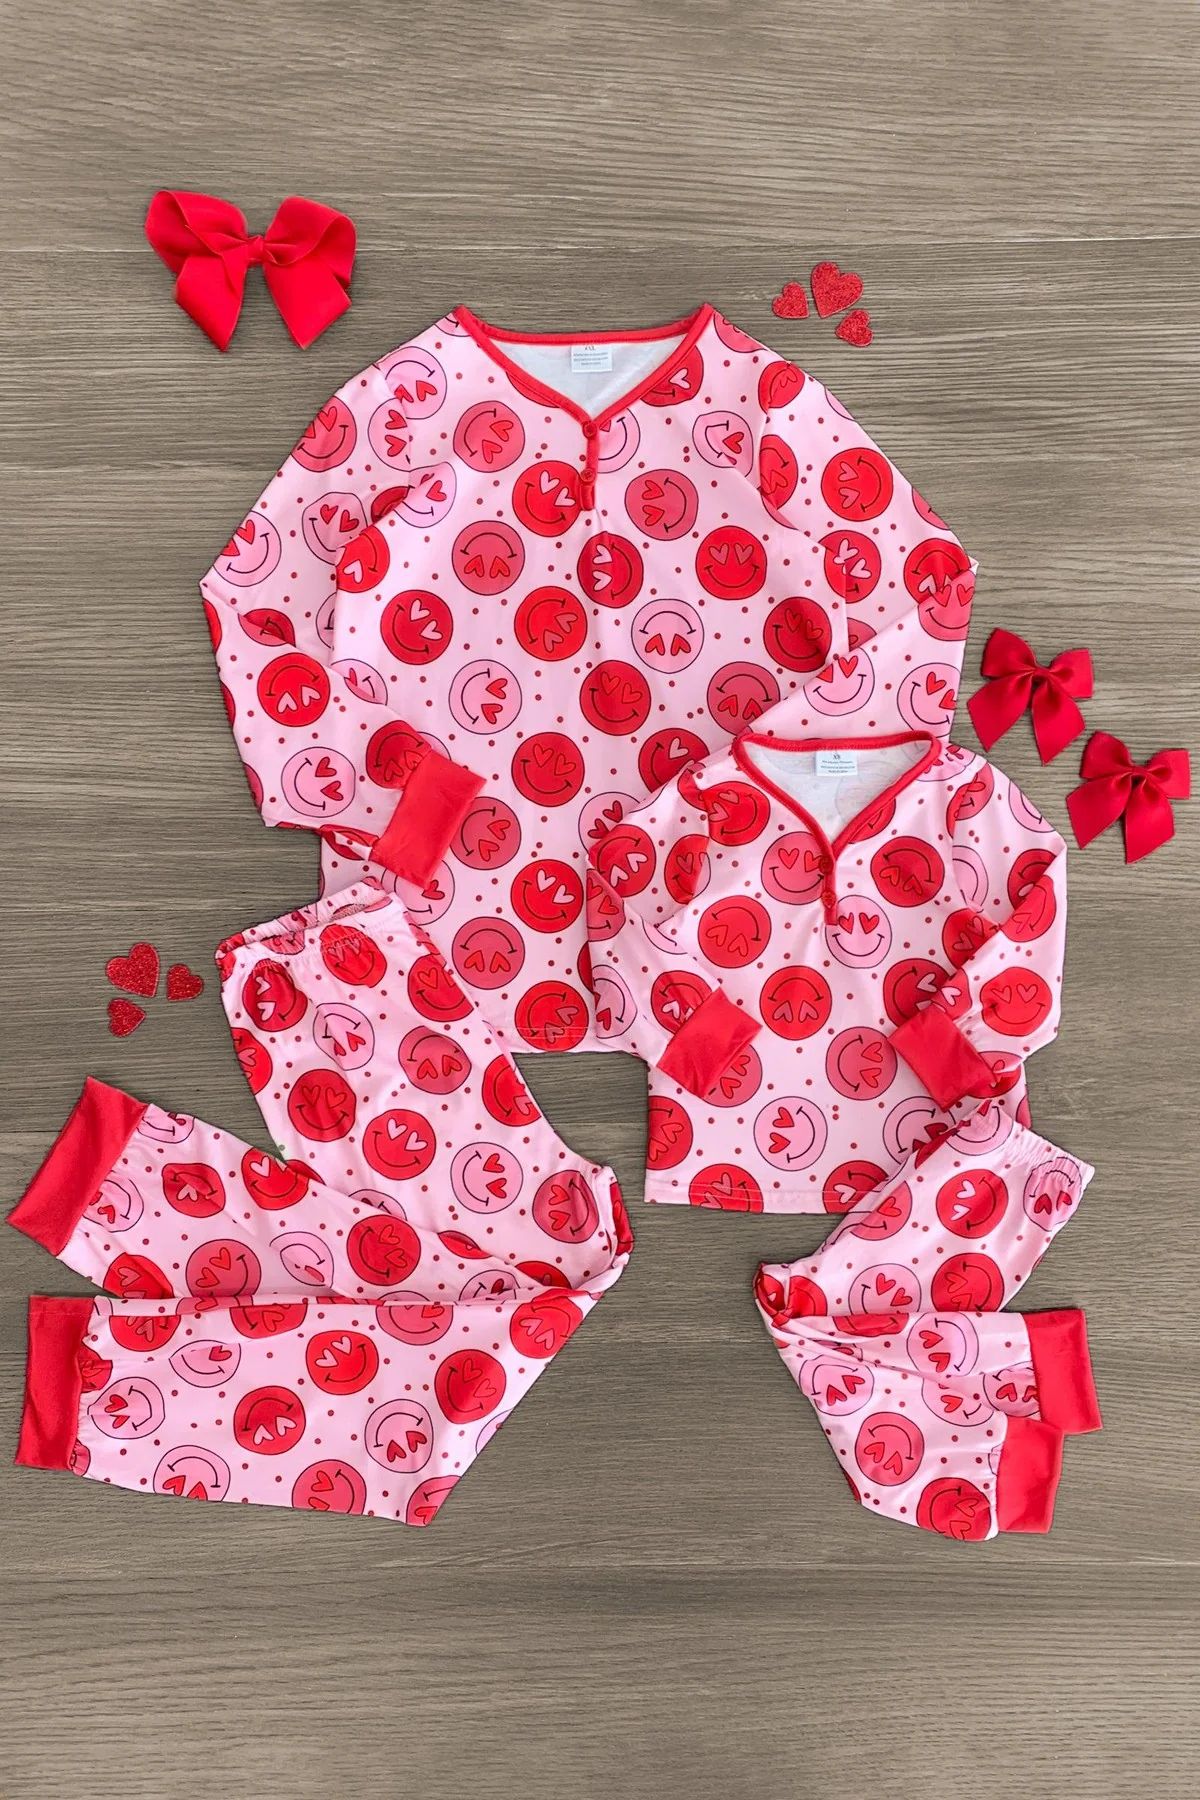 Mom & Me - Pink & Red Smiley Heart Pajamas | Sparkle In Pink